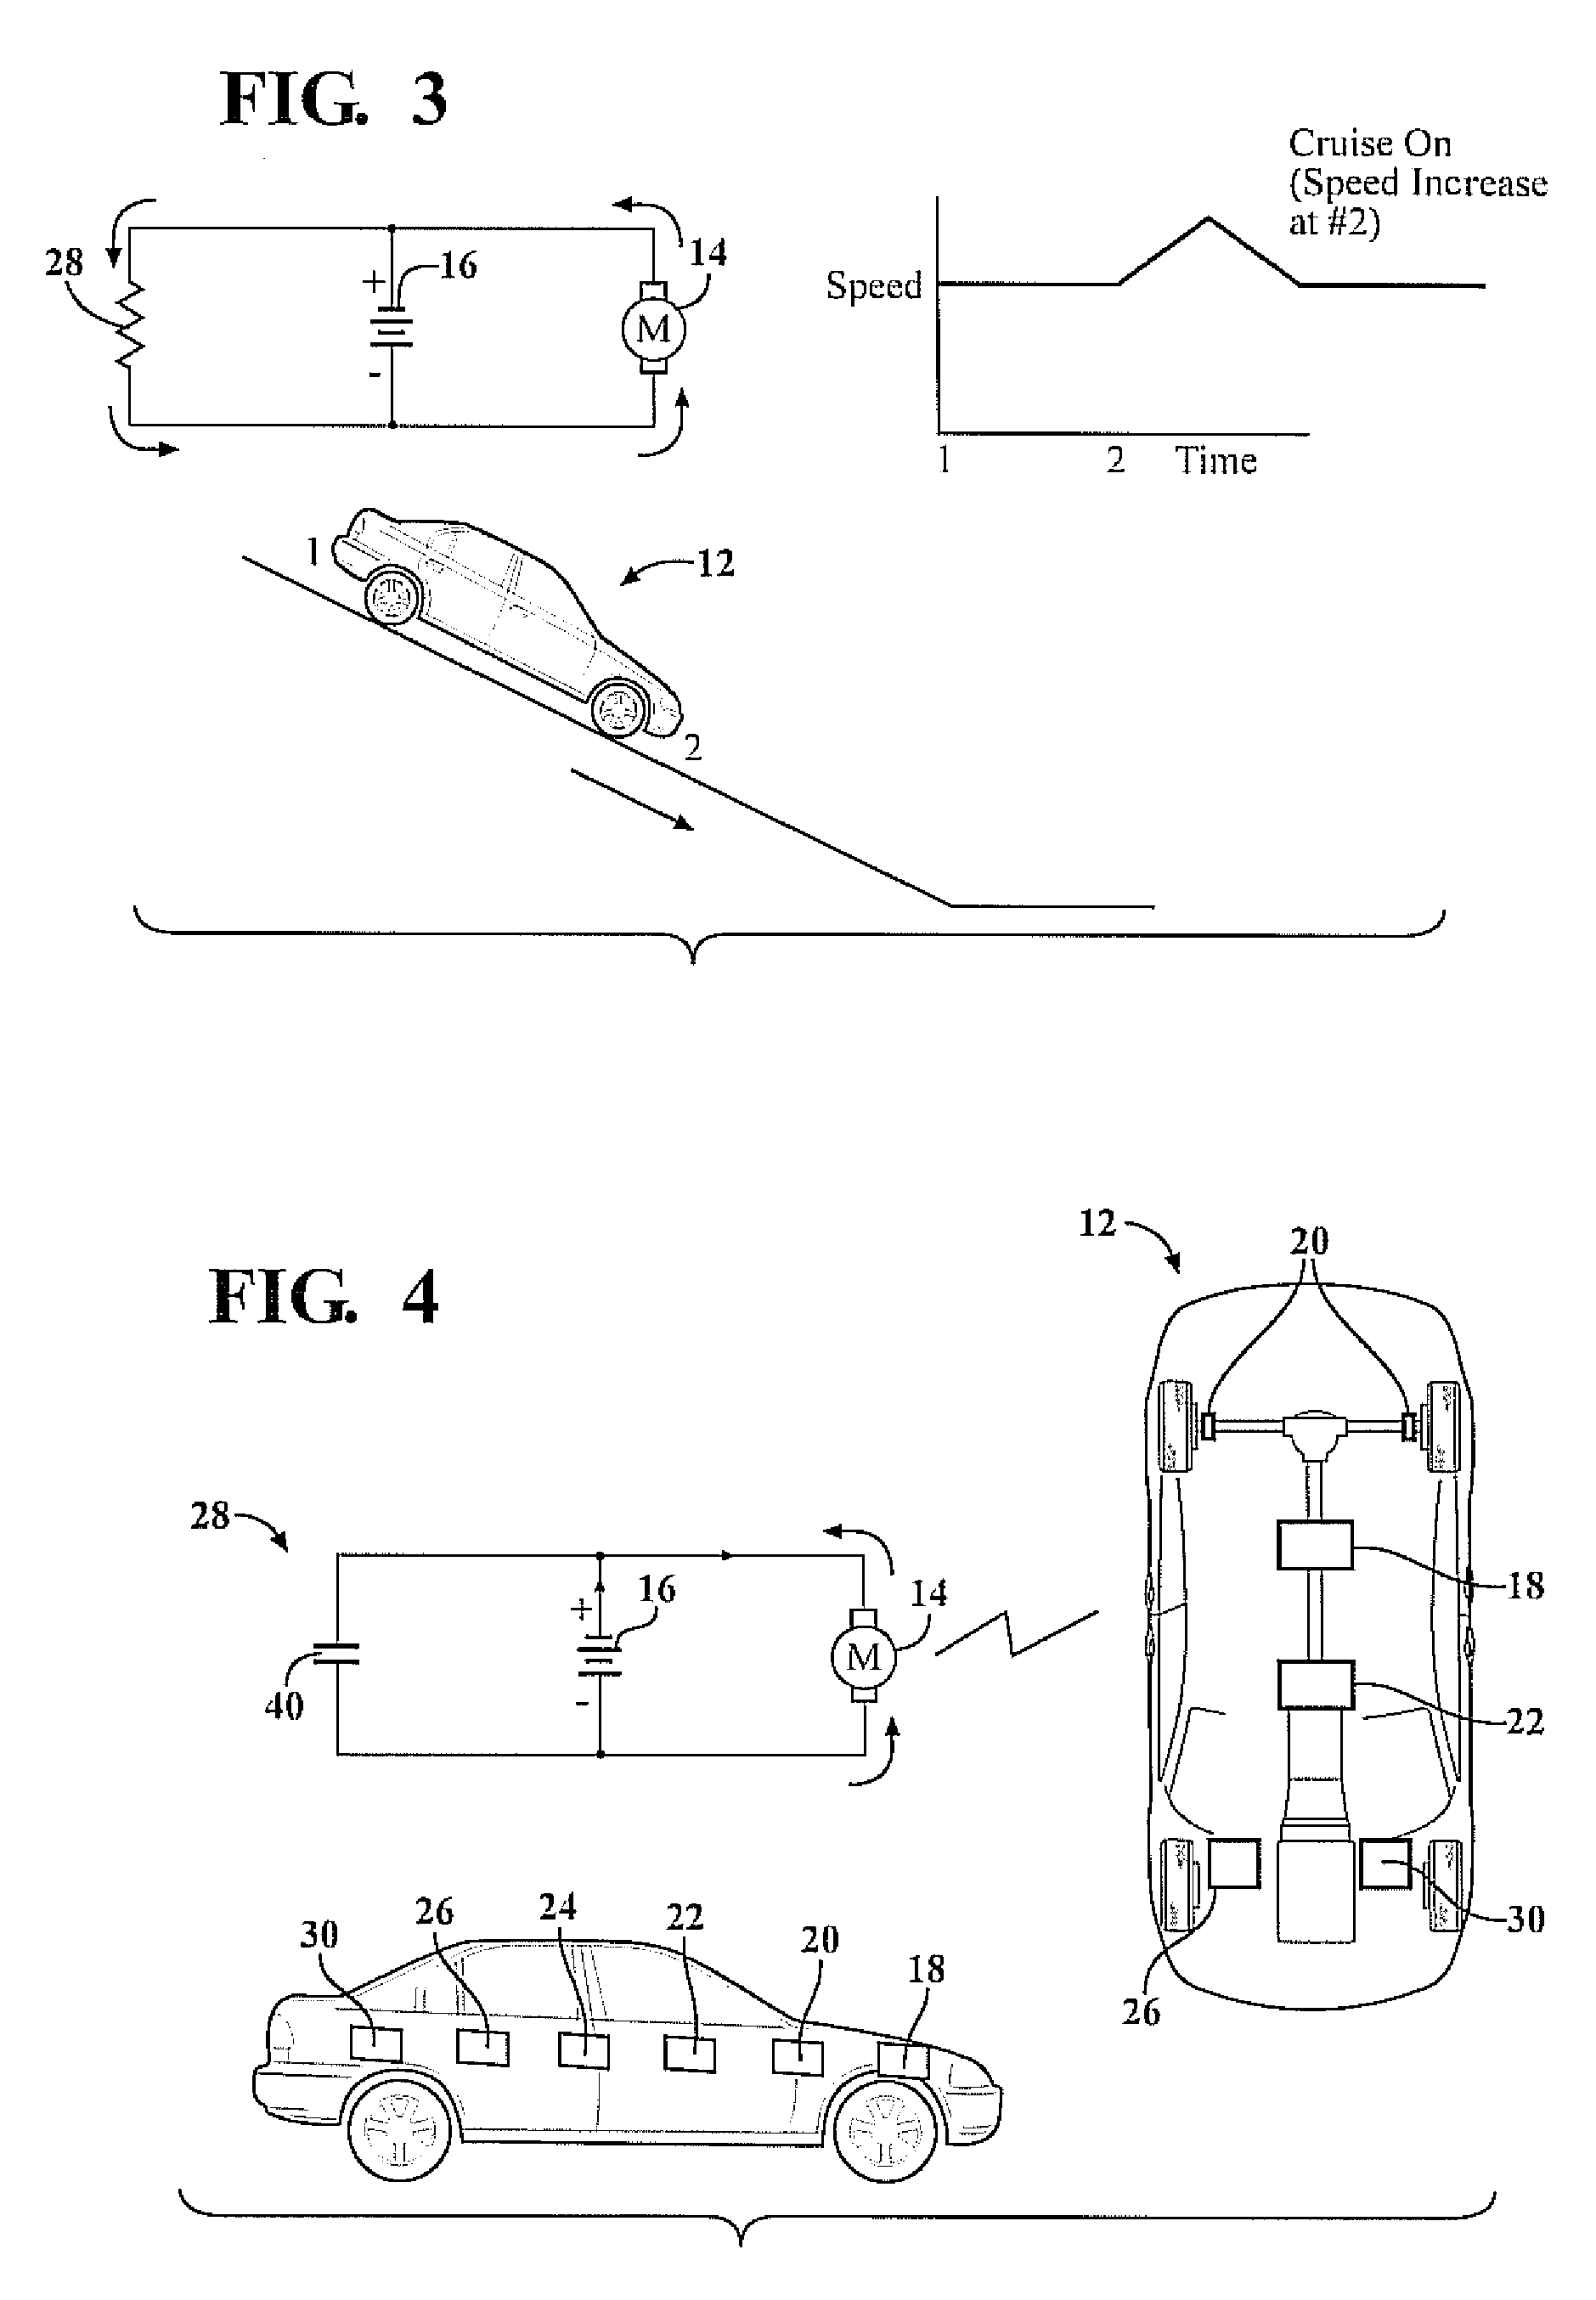 System and method for maintaining the speed of a vehicle